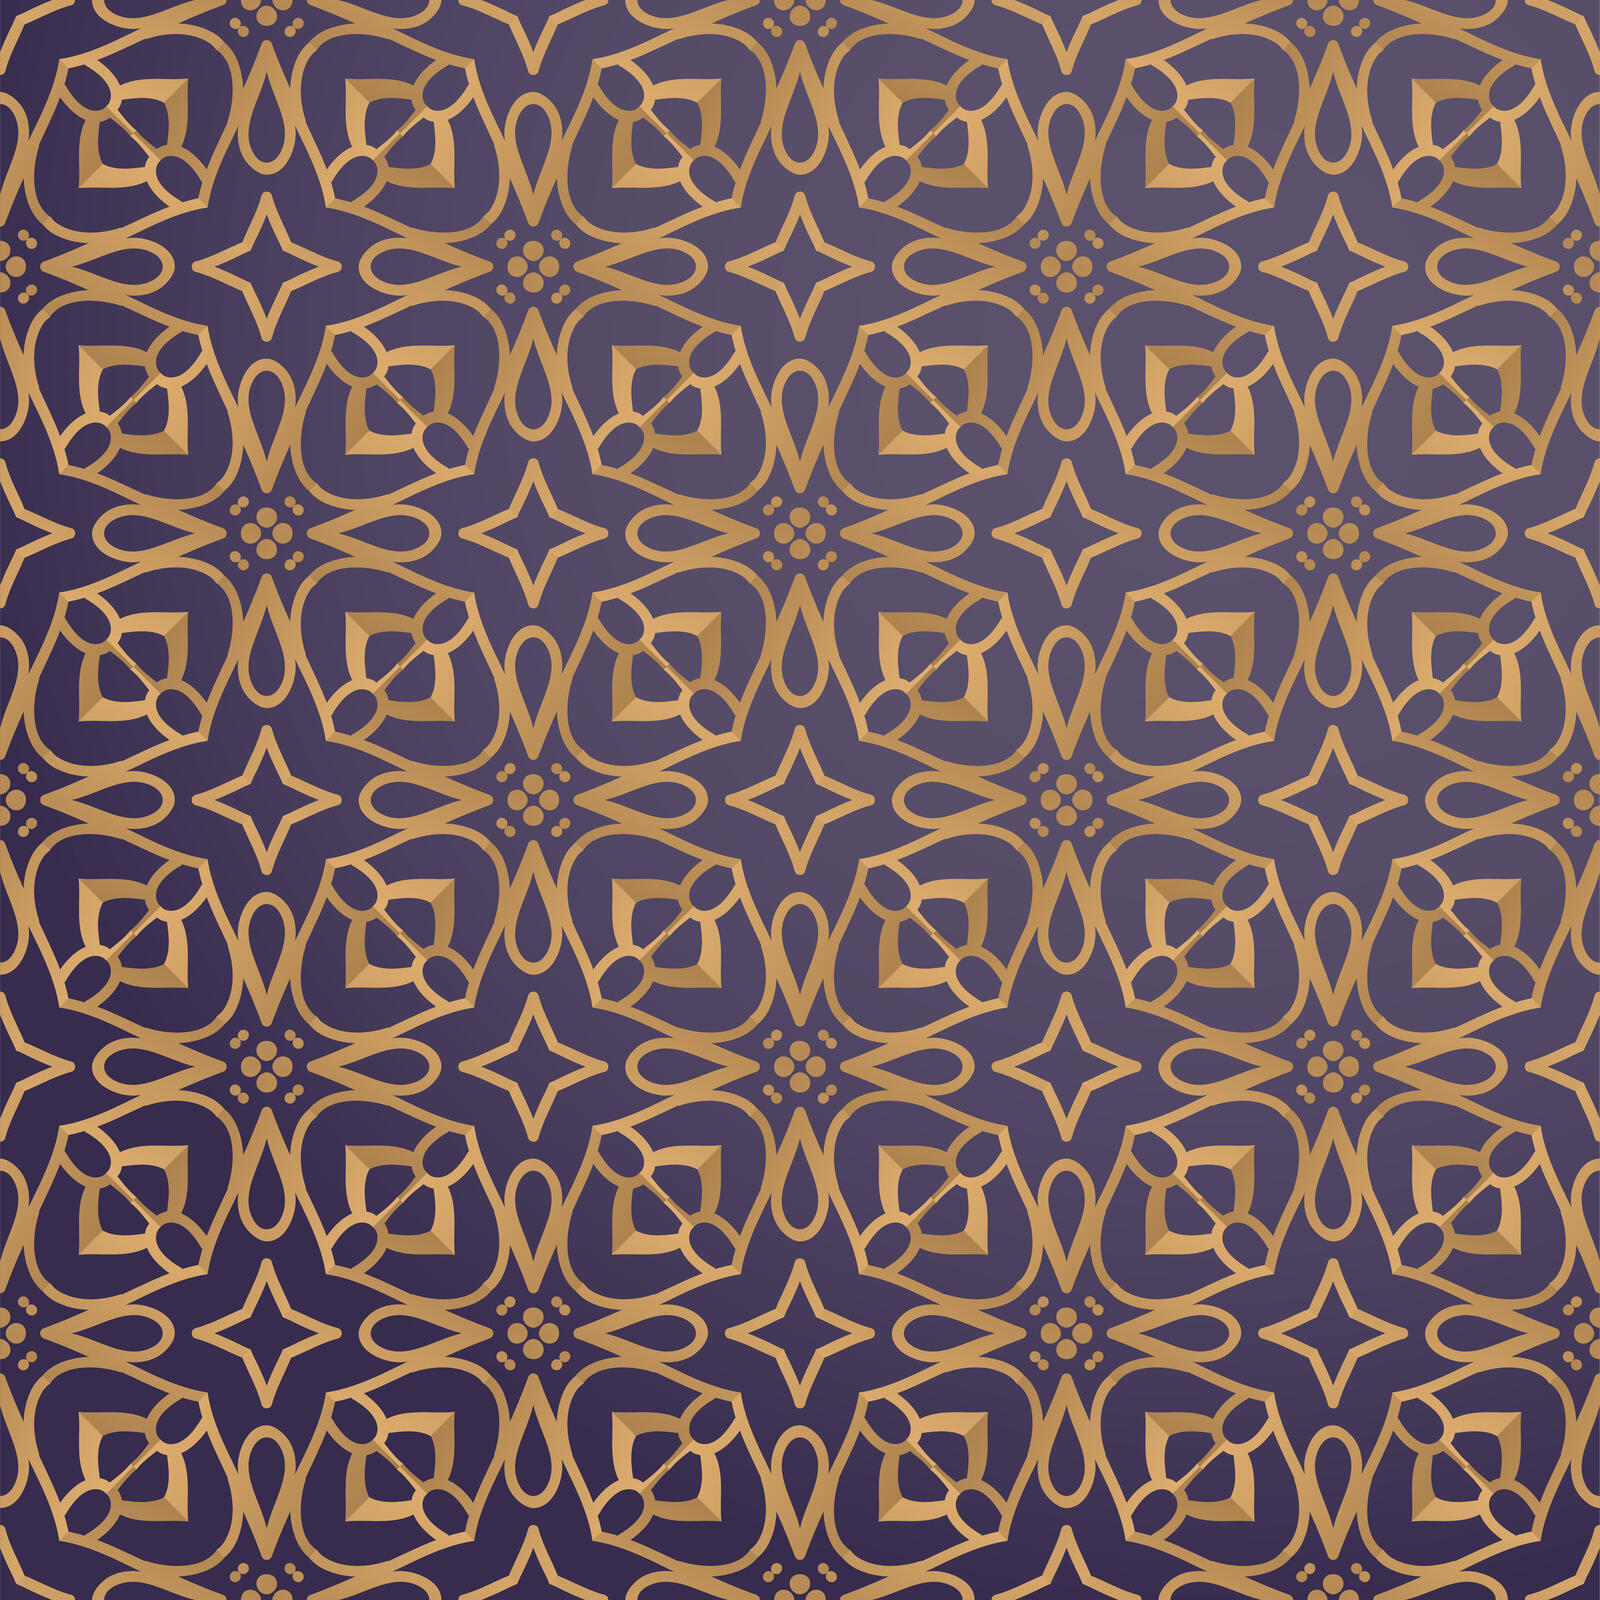 Wallpapers gold ornament background on the desktop